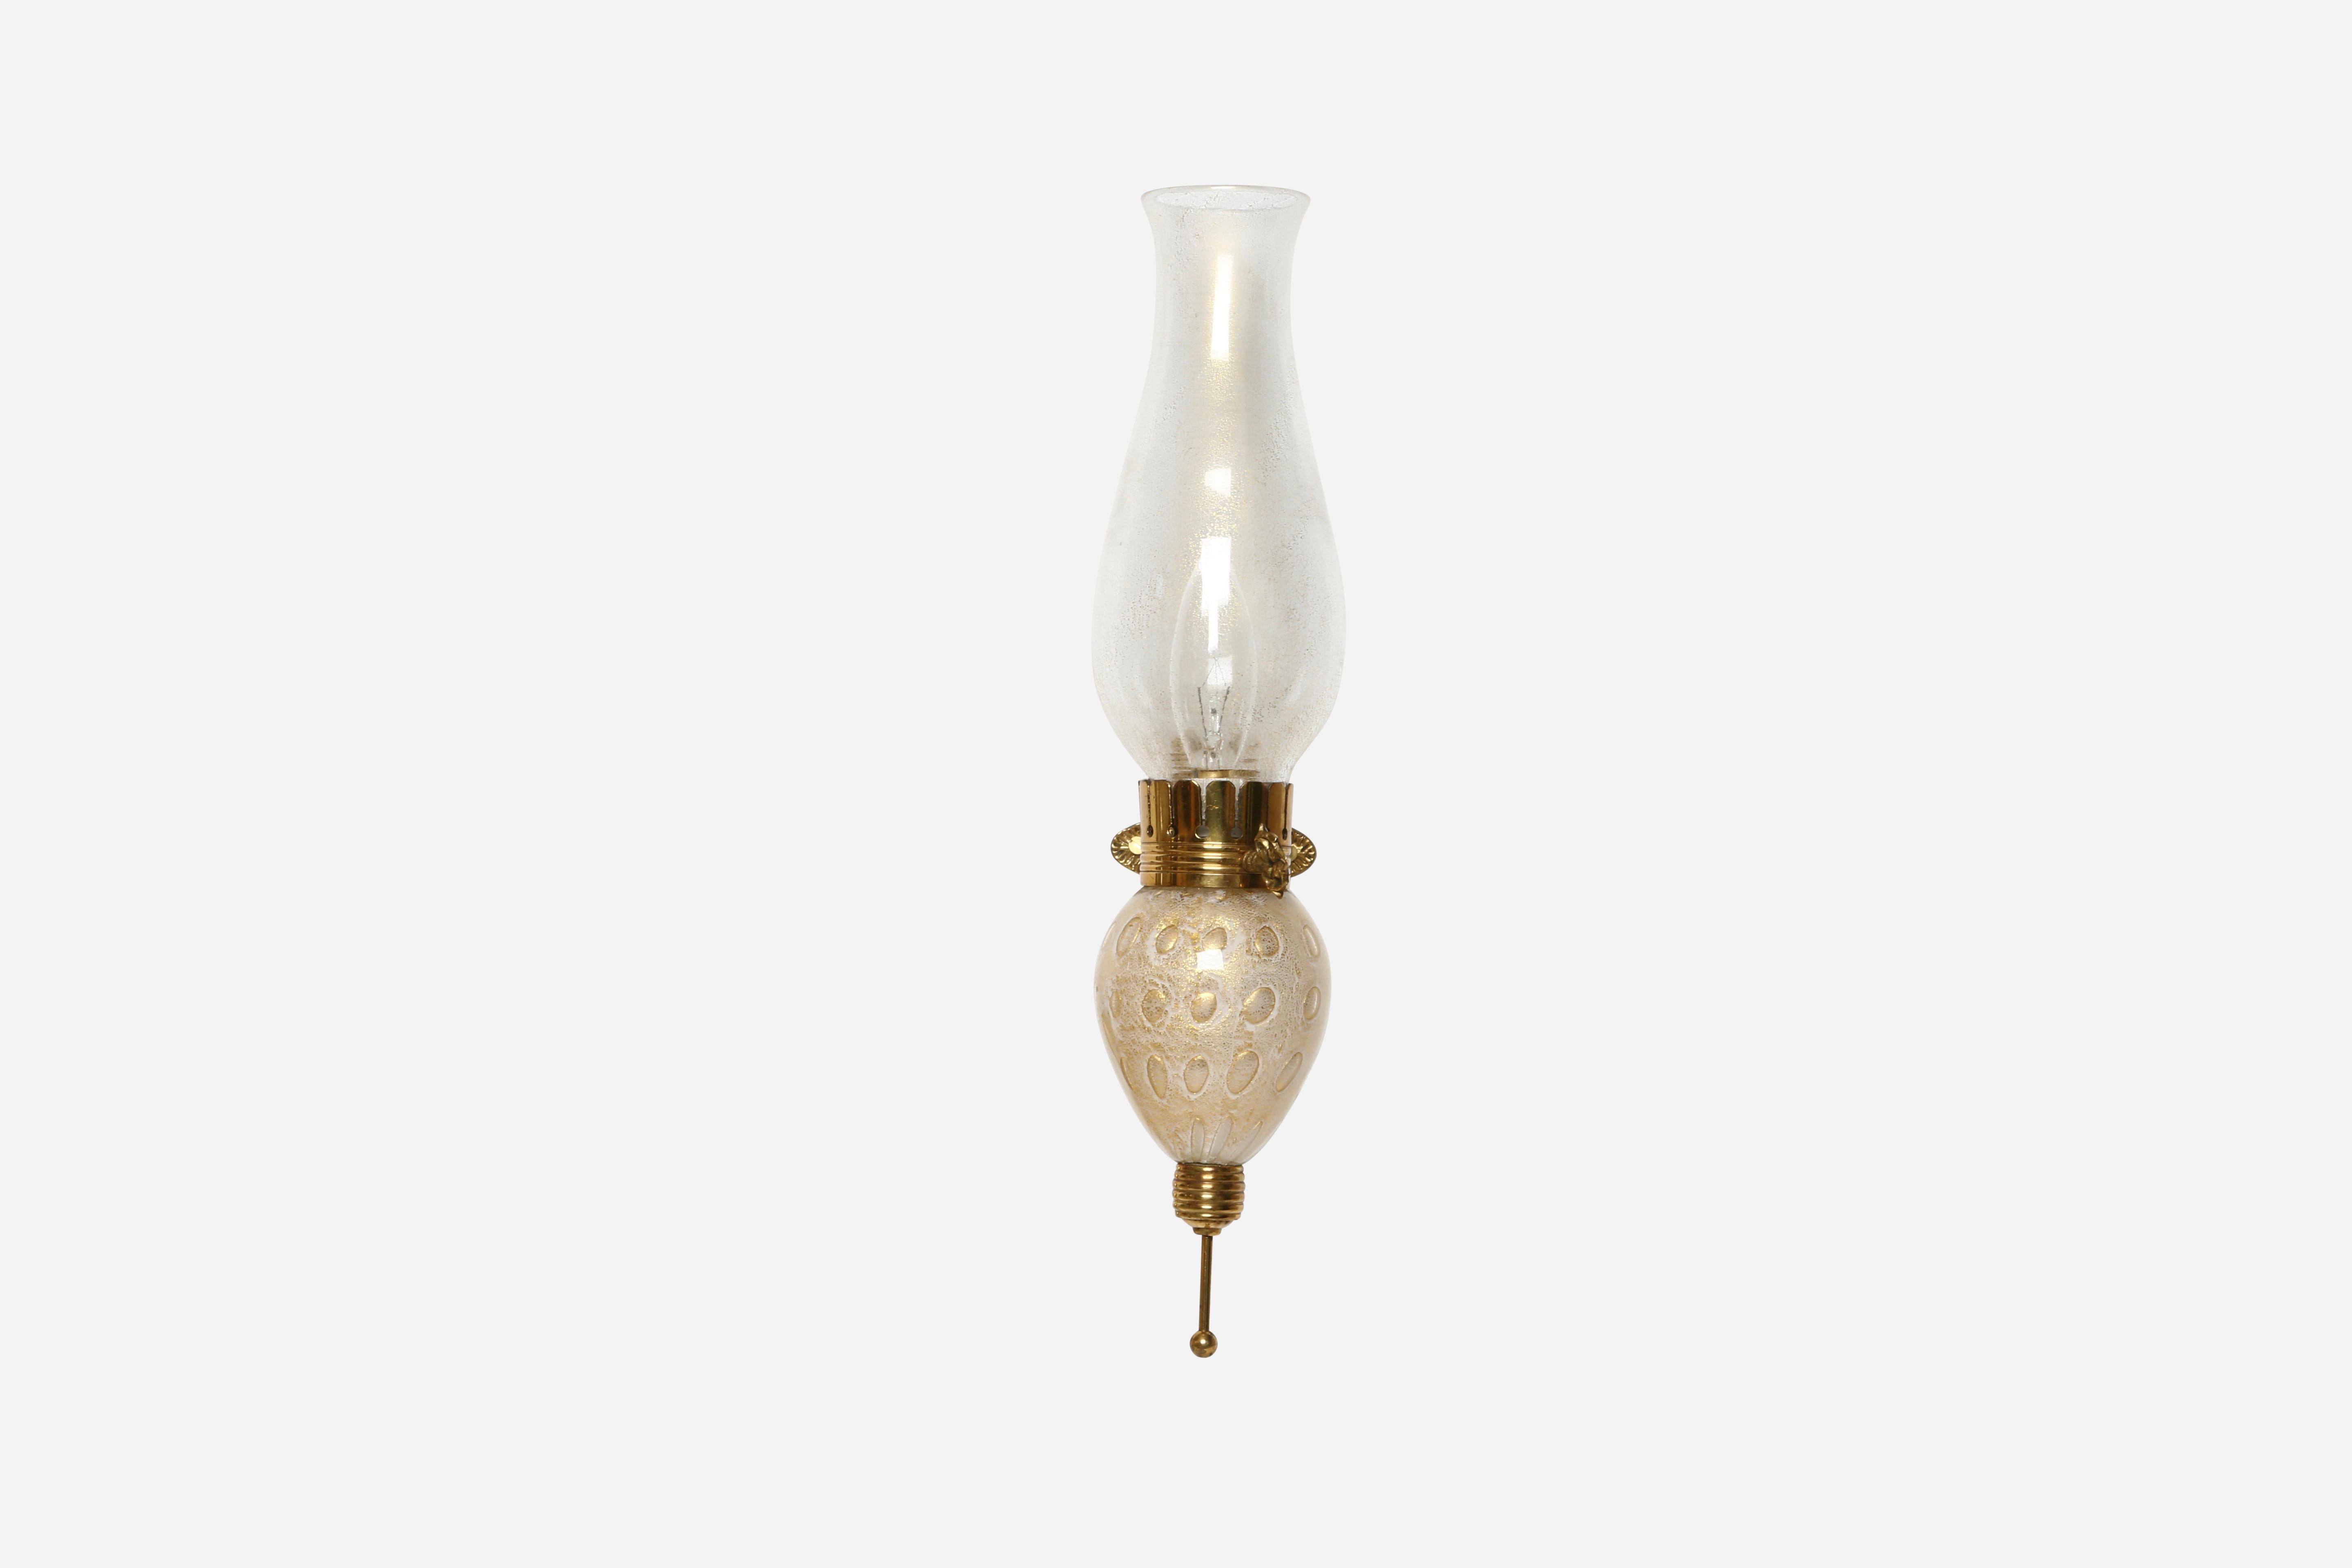 Murano sconce by Seguso.
Exquisite hand blown glass with gold infusions.
Made in Italy in 1940s
Take 1 candelabra bulb 
Complimentary US rewiring with a custom backplate upon request.

We take pride in bringing vintage fixtures to their full glory